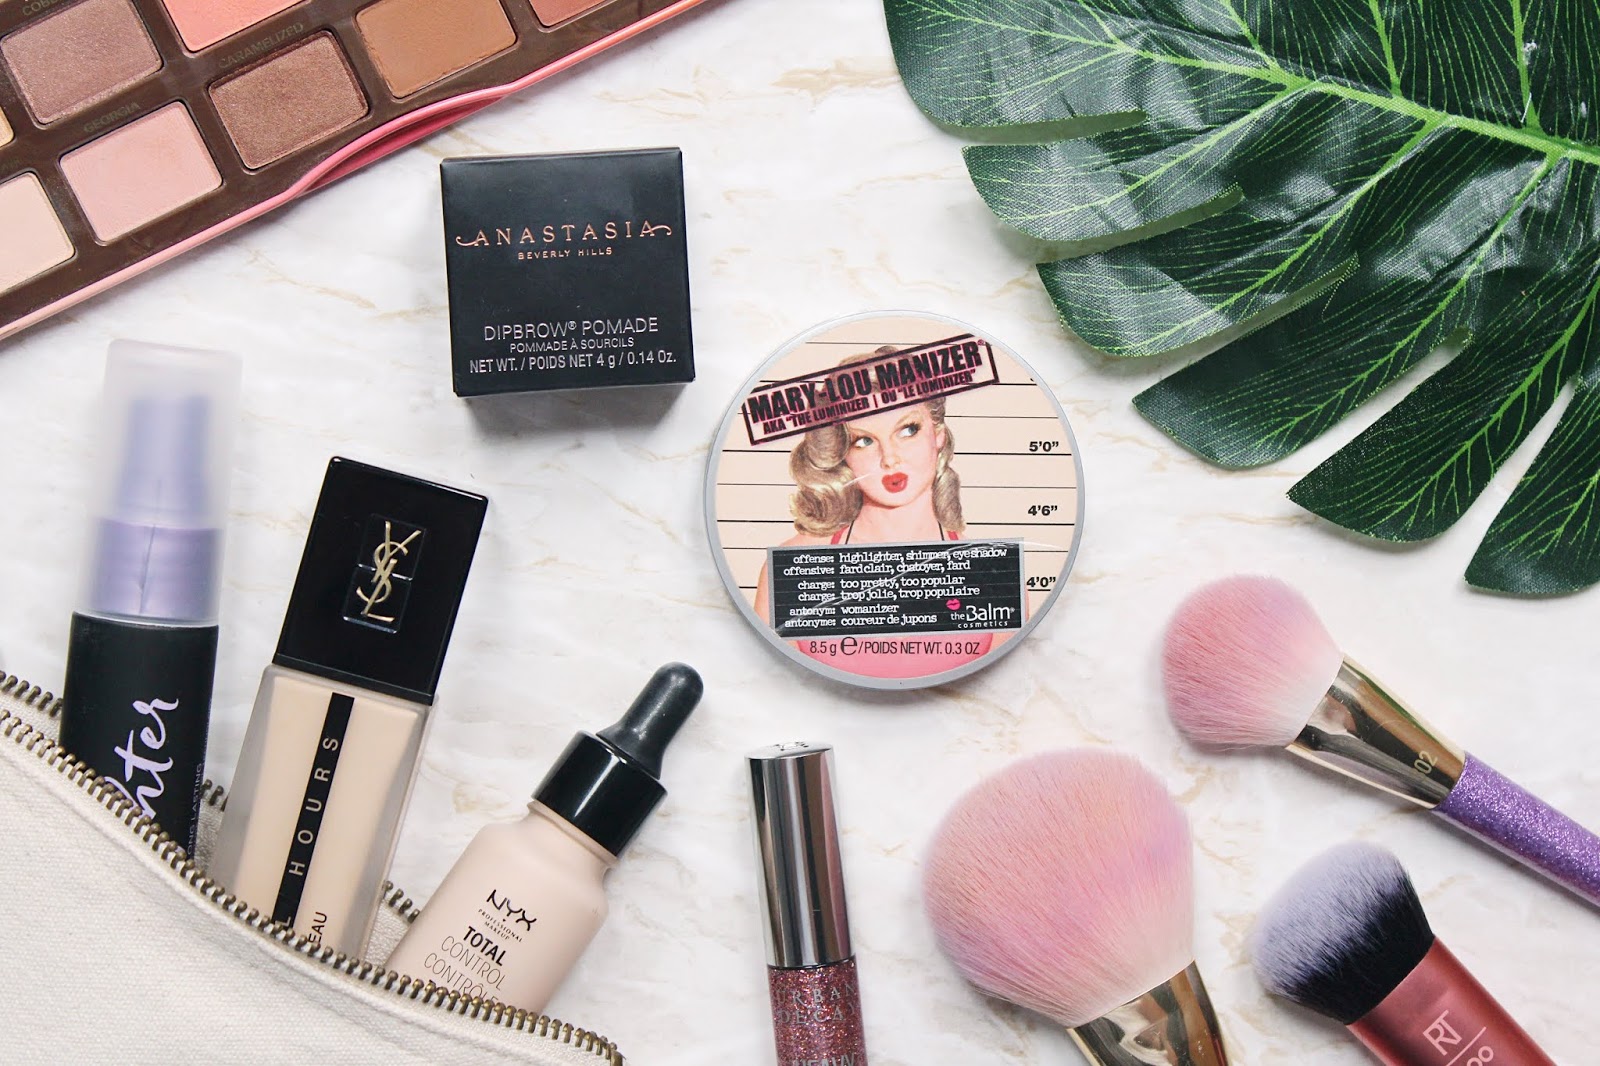 My Festival Beauty Essentials with Cosmetify 